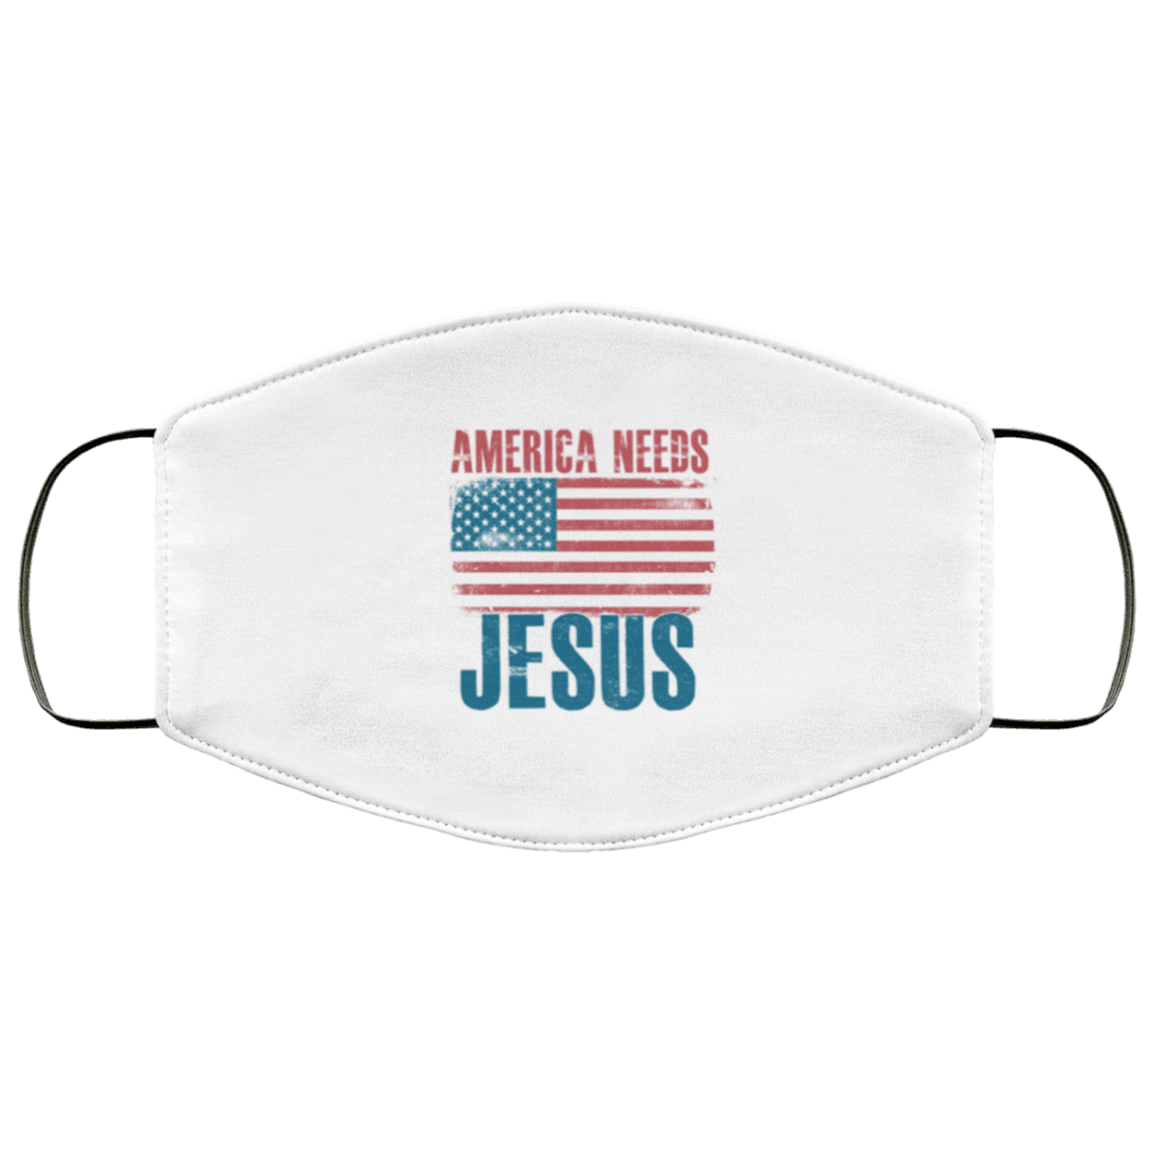 Designs by MyUtopia Shout Out:America Needs Jesus Adult Fabric Face Mask with Elastic Ear Loops,3 Layer Fabric Face Mask / White / Adult,Fabric Face Mask